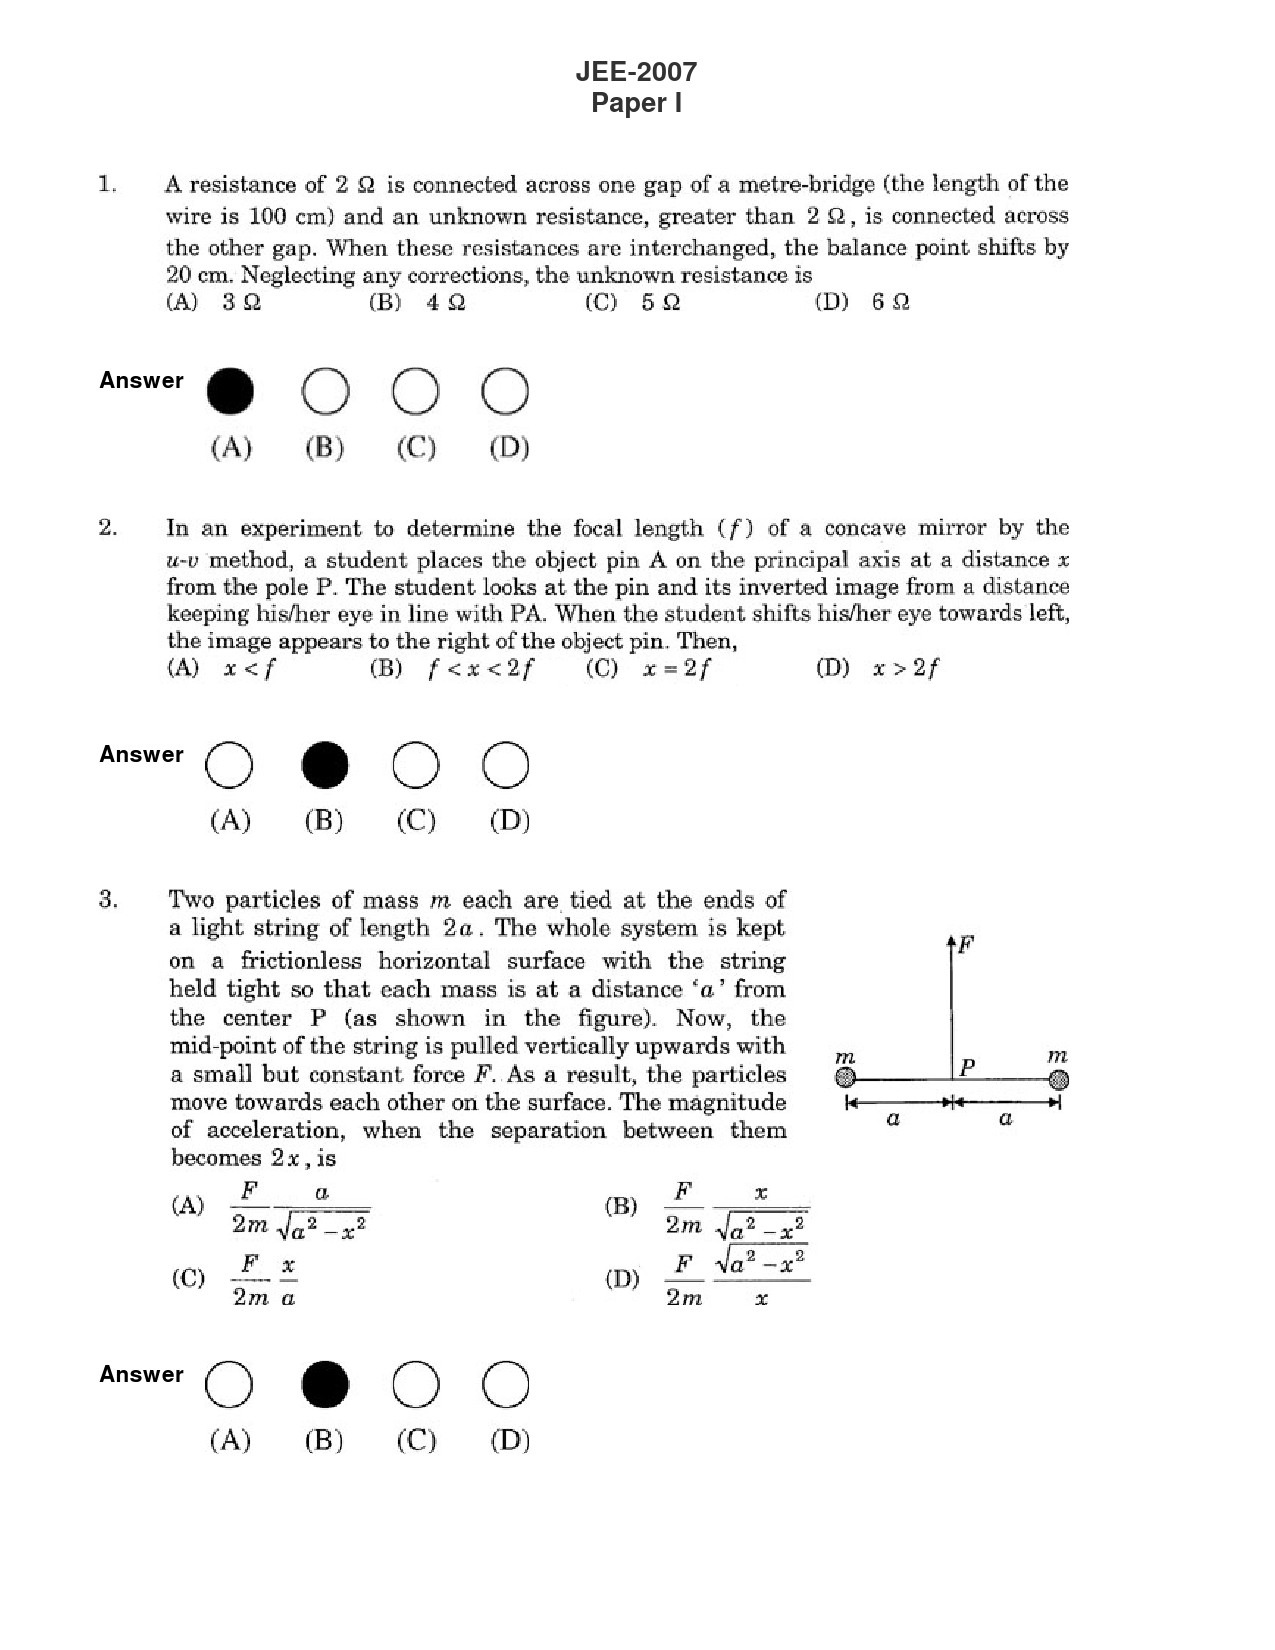 JEE Exam Question Paper 2007 Paper 1 1